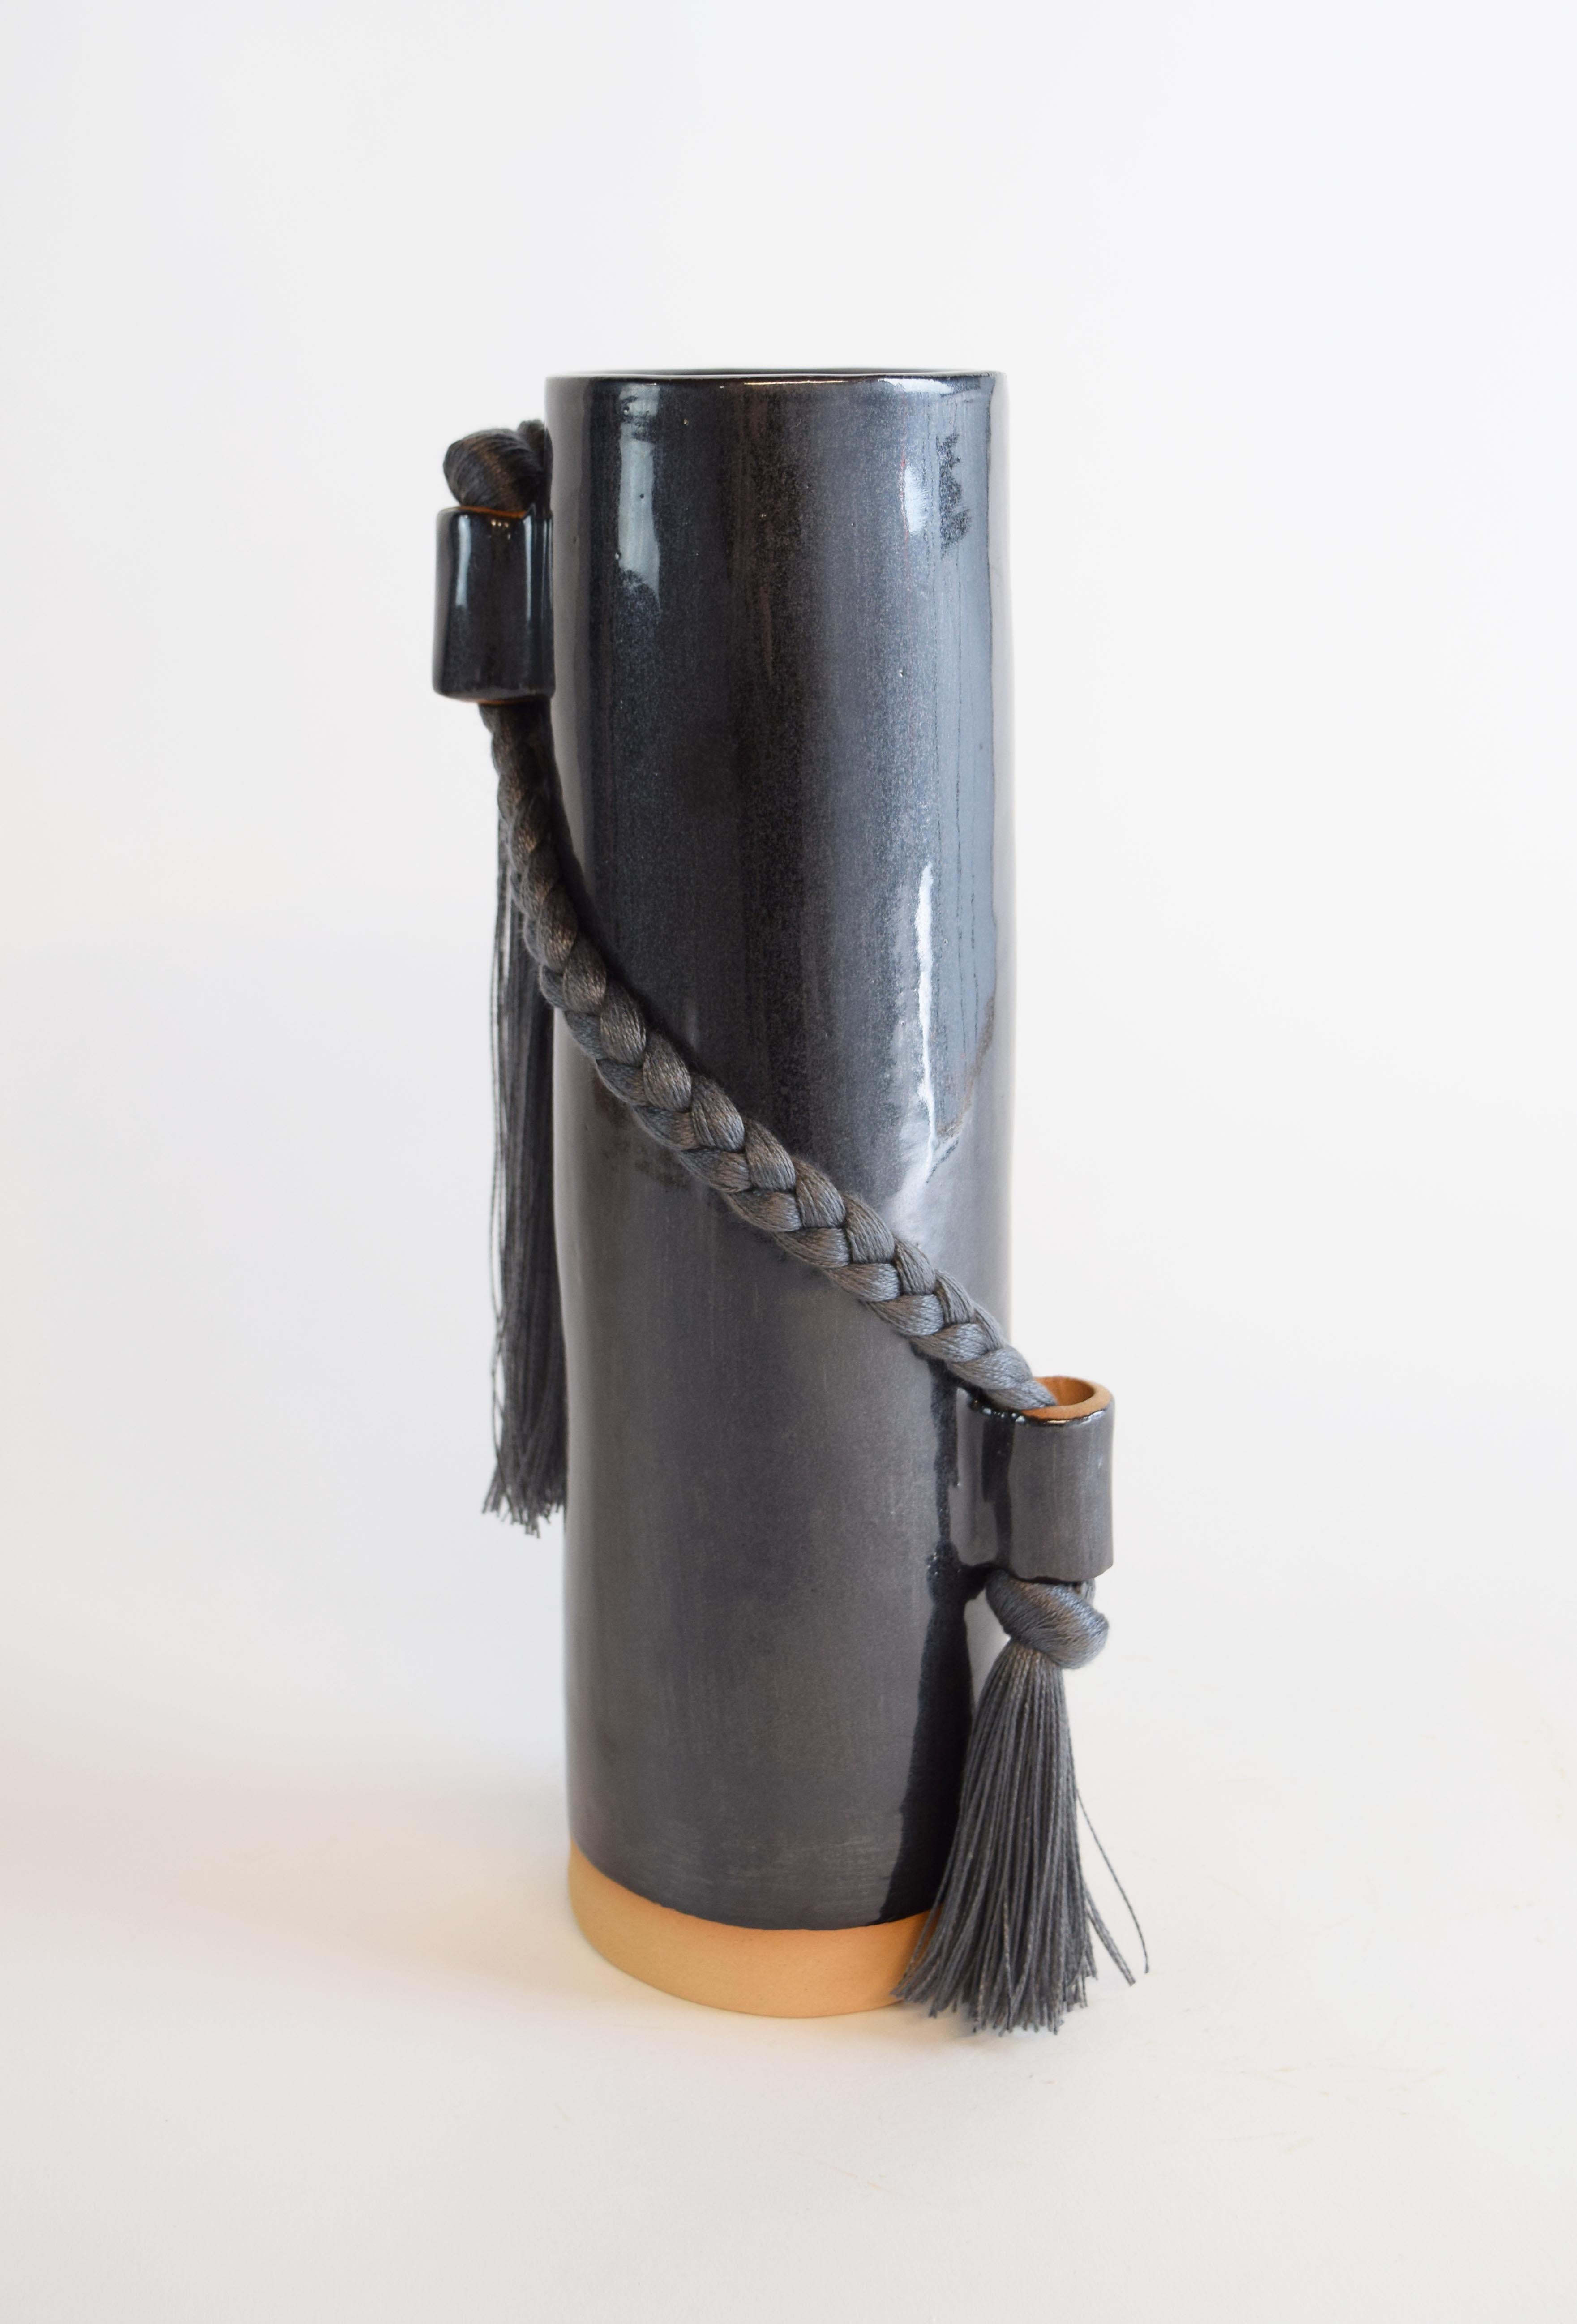 Organic Modern Handmade Ceramic Vase #695 in Black with Charcoal Tencel Braid and Fringe For Sale